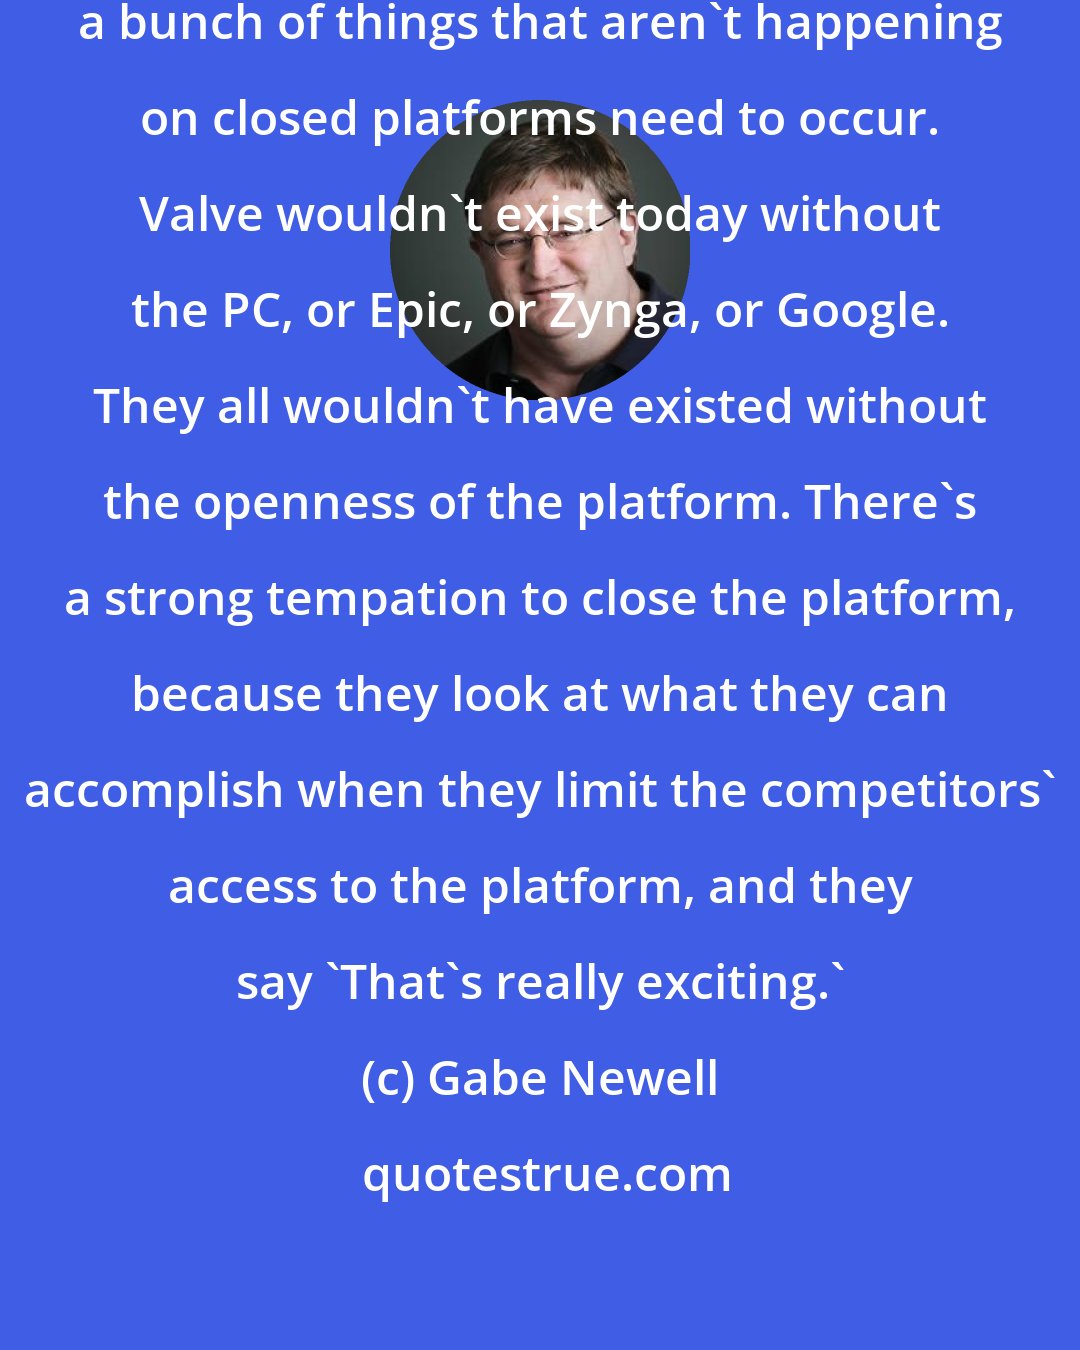 Gabe Newell: In order for innovation to happen, a bunch of things that aren't happening on closed platforms need to occur. Valve wouldn't exist today without the PC, or Epic, or Zynga, or Google. They all wouldn't have existed without the openness of the platform. There's a strong tempation to close the platform, because they look at what they can accomplish when they limit the competitors' access to the platform, and they say 'That's really exciting.'